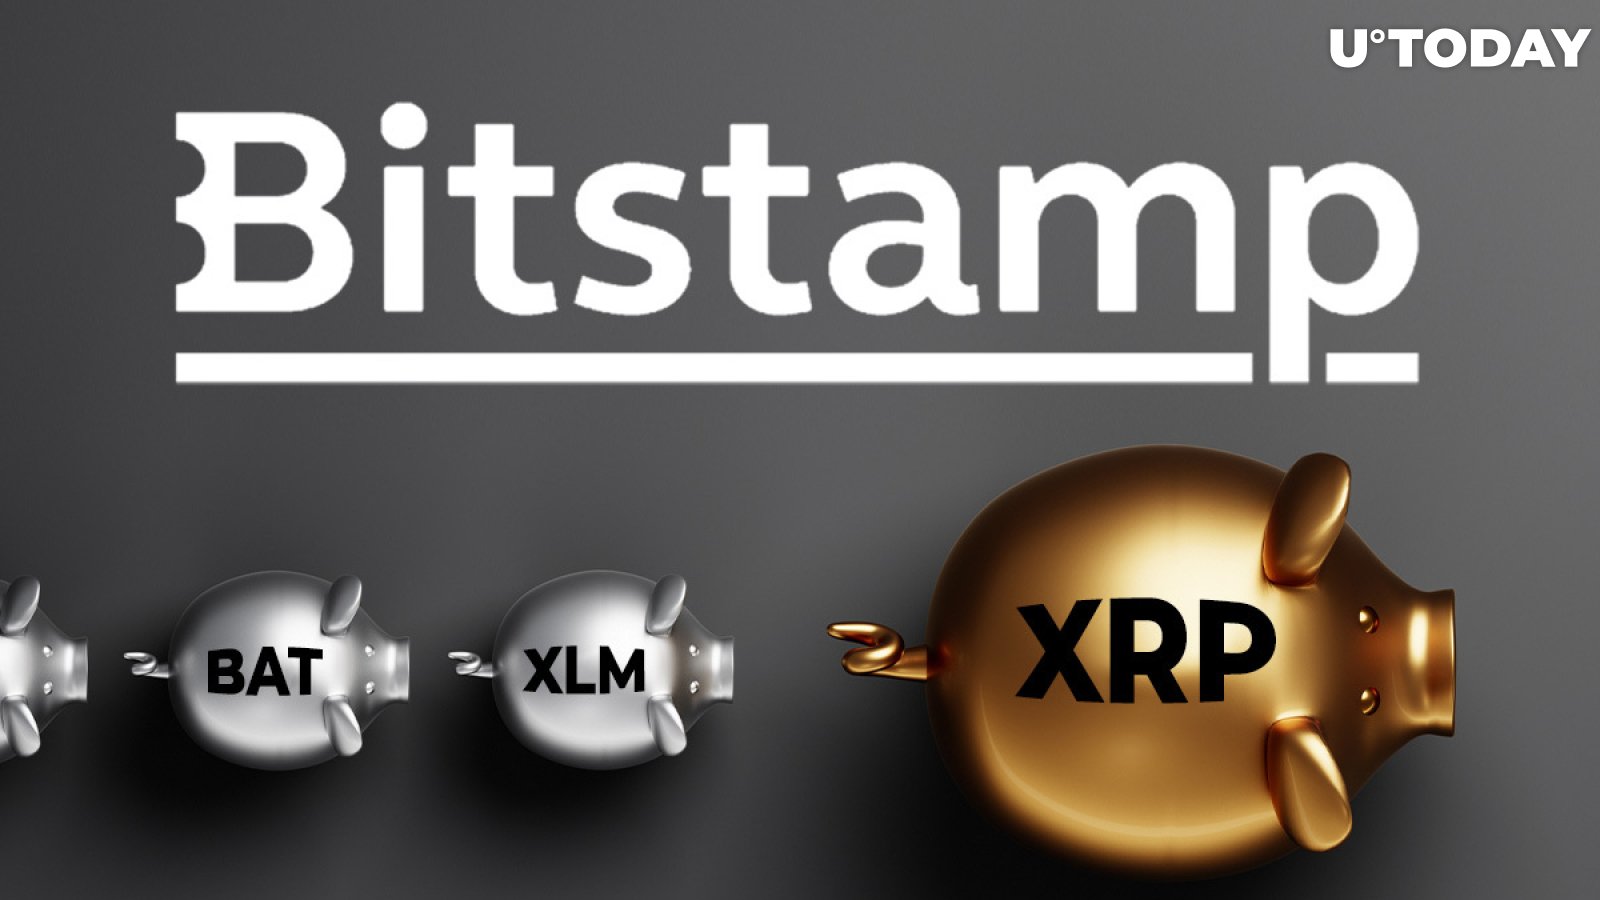 Bitstamp to List XLM, PAX While XRP Liquidity Index On Bitstamp Close to New ATH